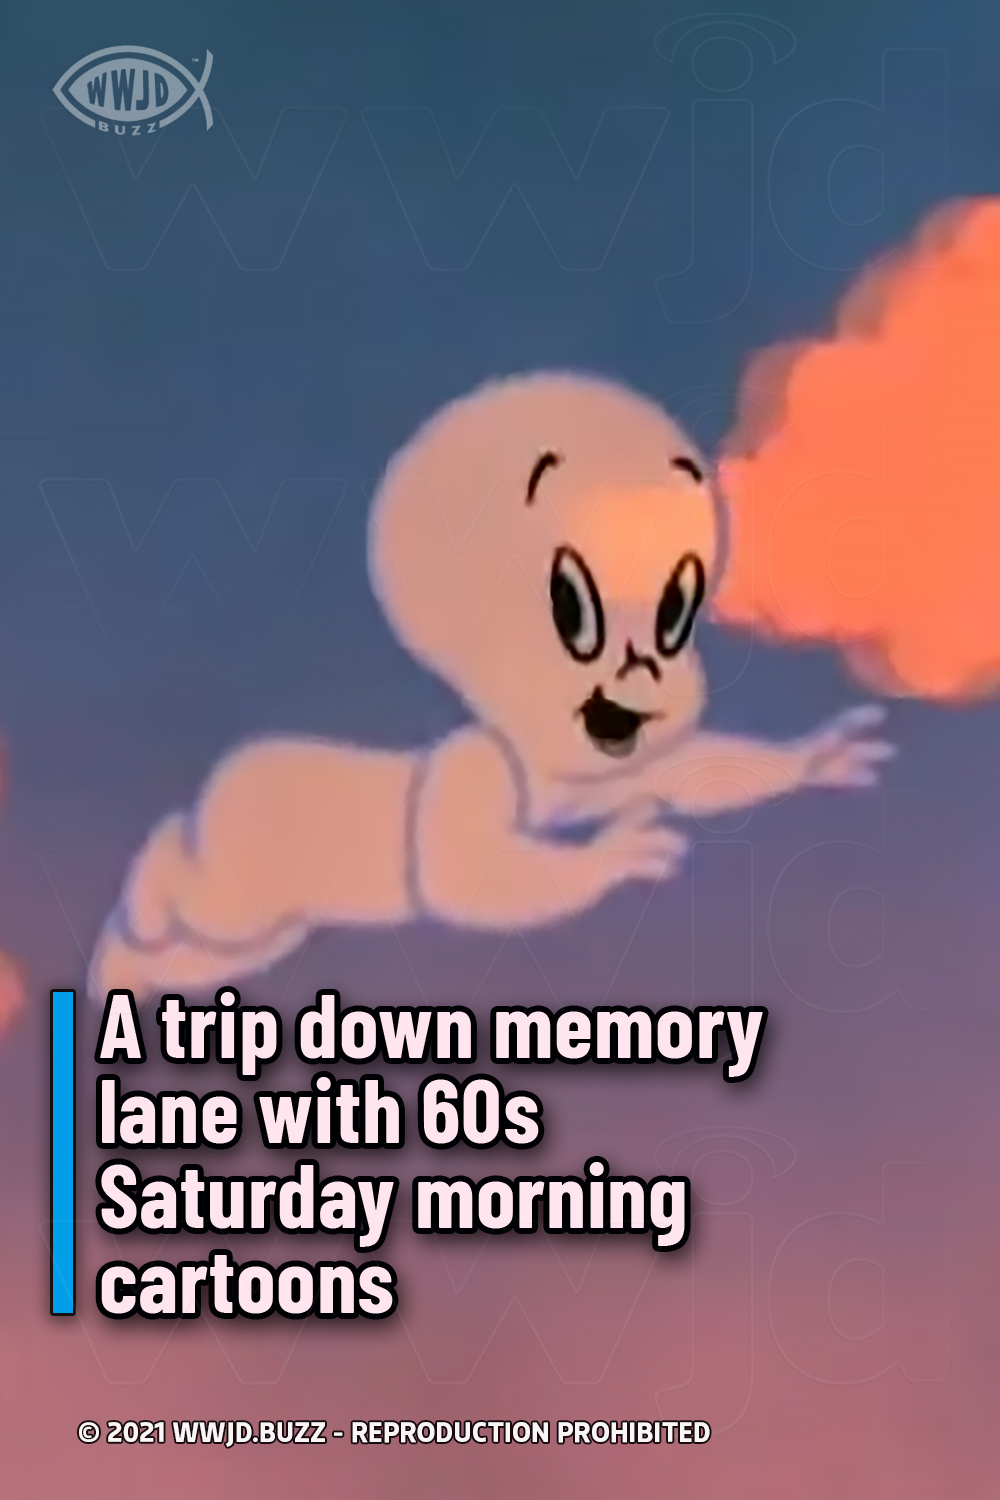 A trip down memory lane with 60s Saturday morning cartoons